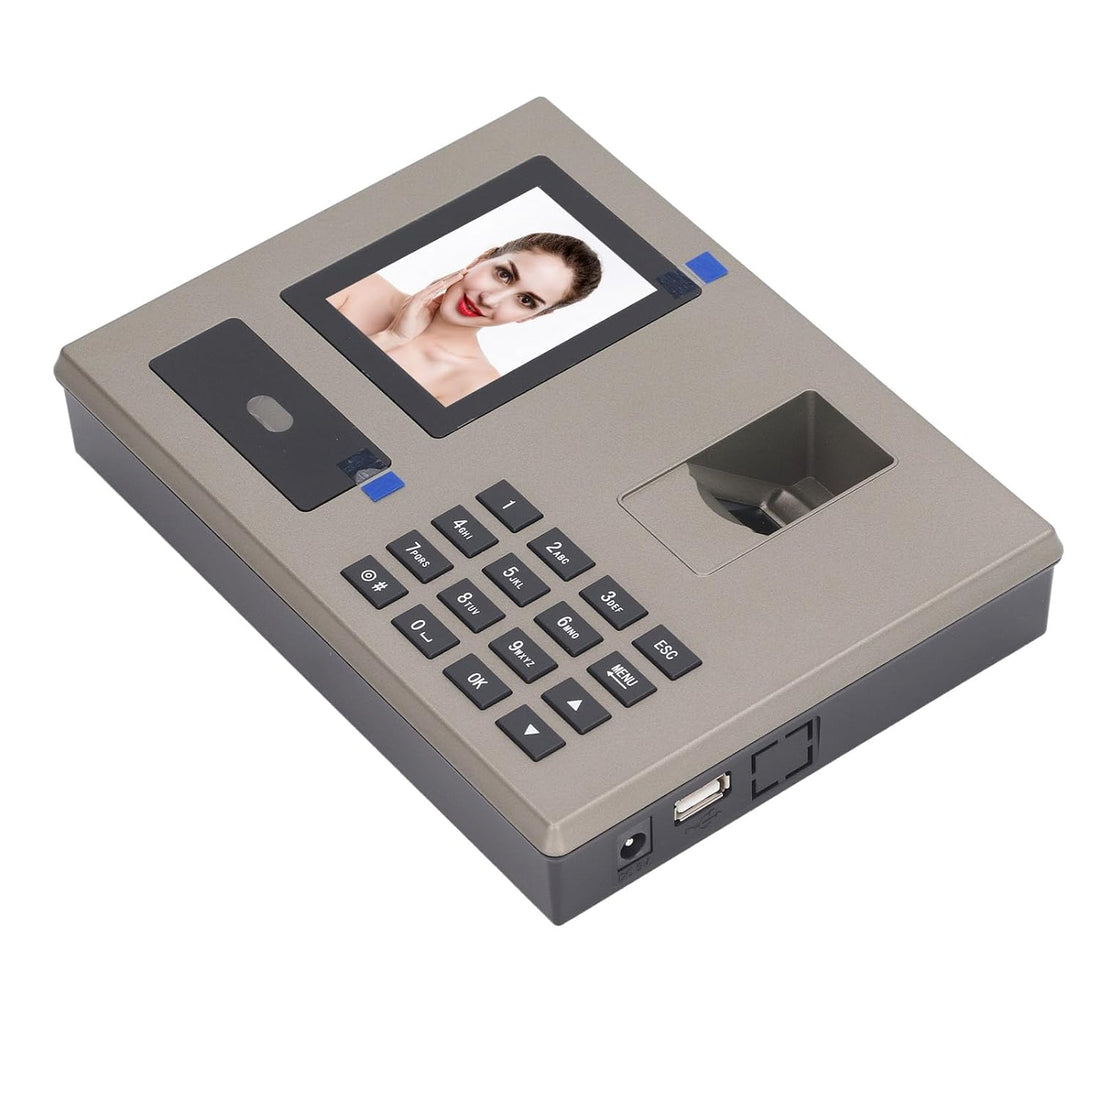 Face Biometric Time Attendance Machine, 100-240V 360 Degree Recognition PIN Punch Hot Voice Employee Attendance Machine for Office (US Plug)